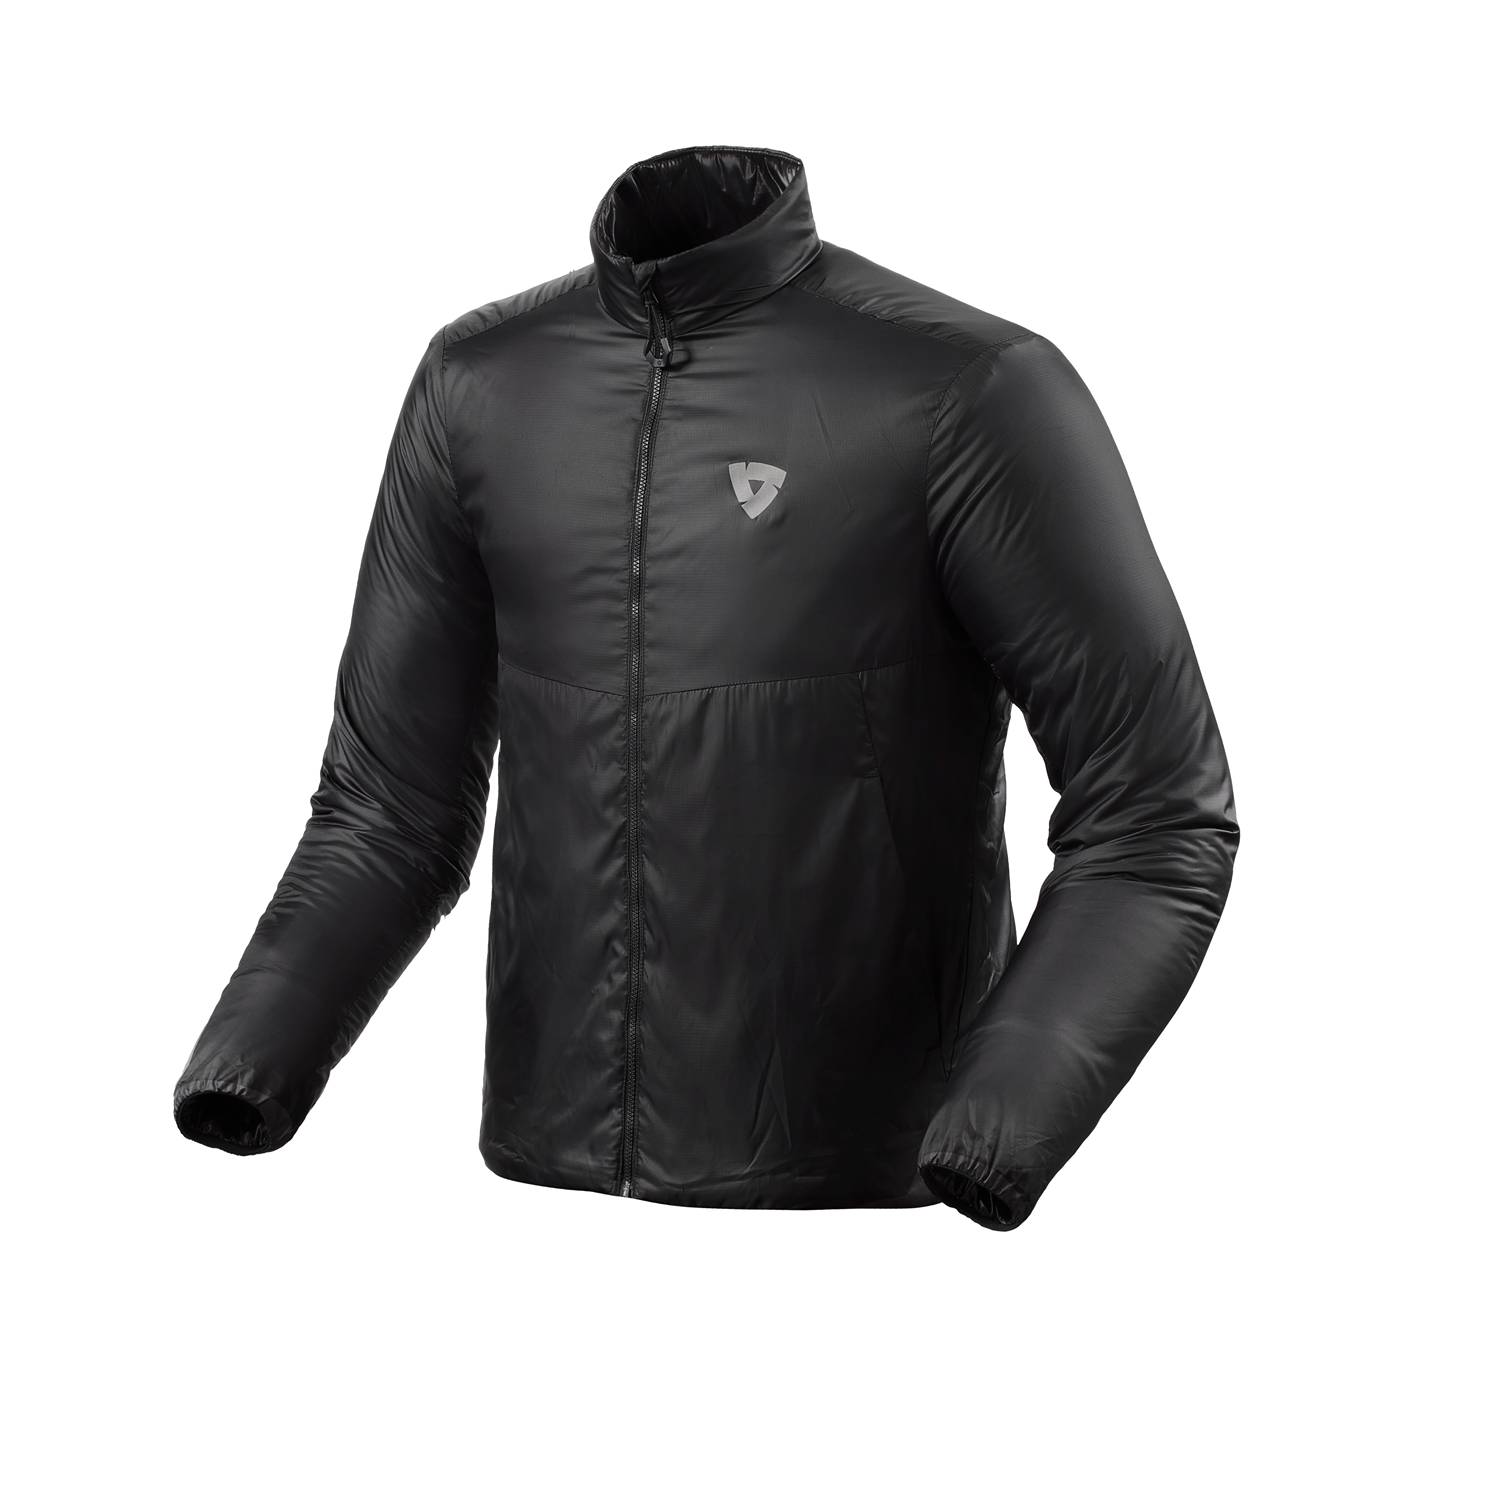 Image of EU REV'IT! Core 2 Mid Layer Jacket Black Taille 3XL